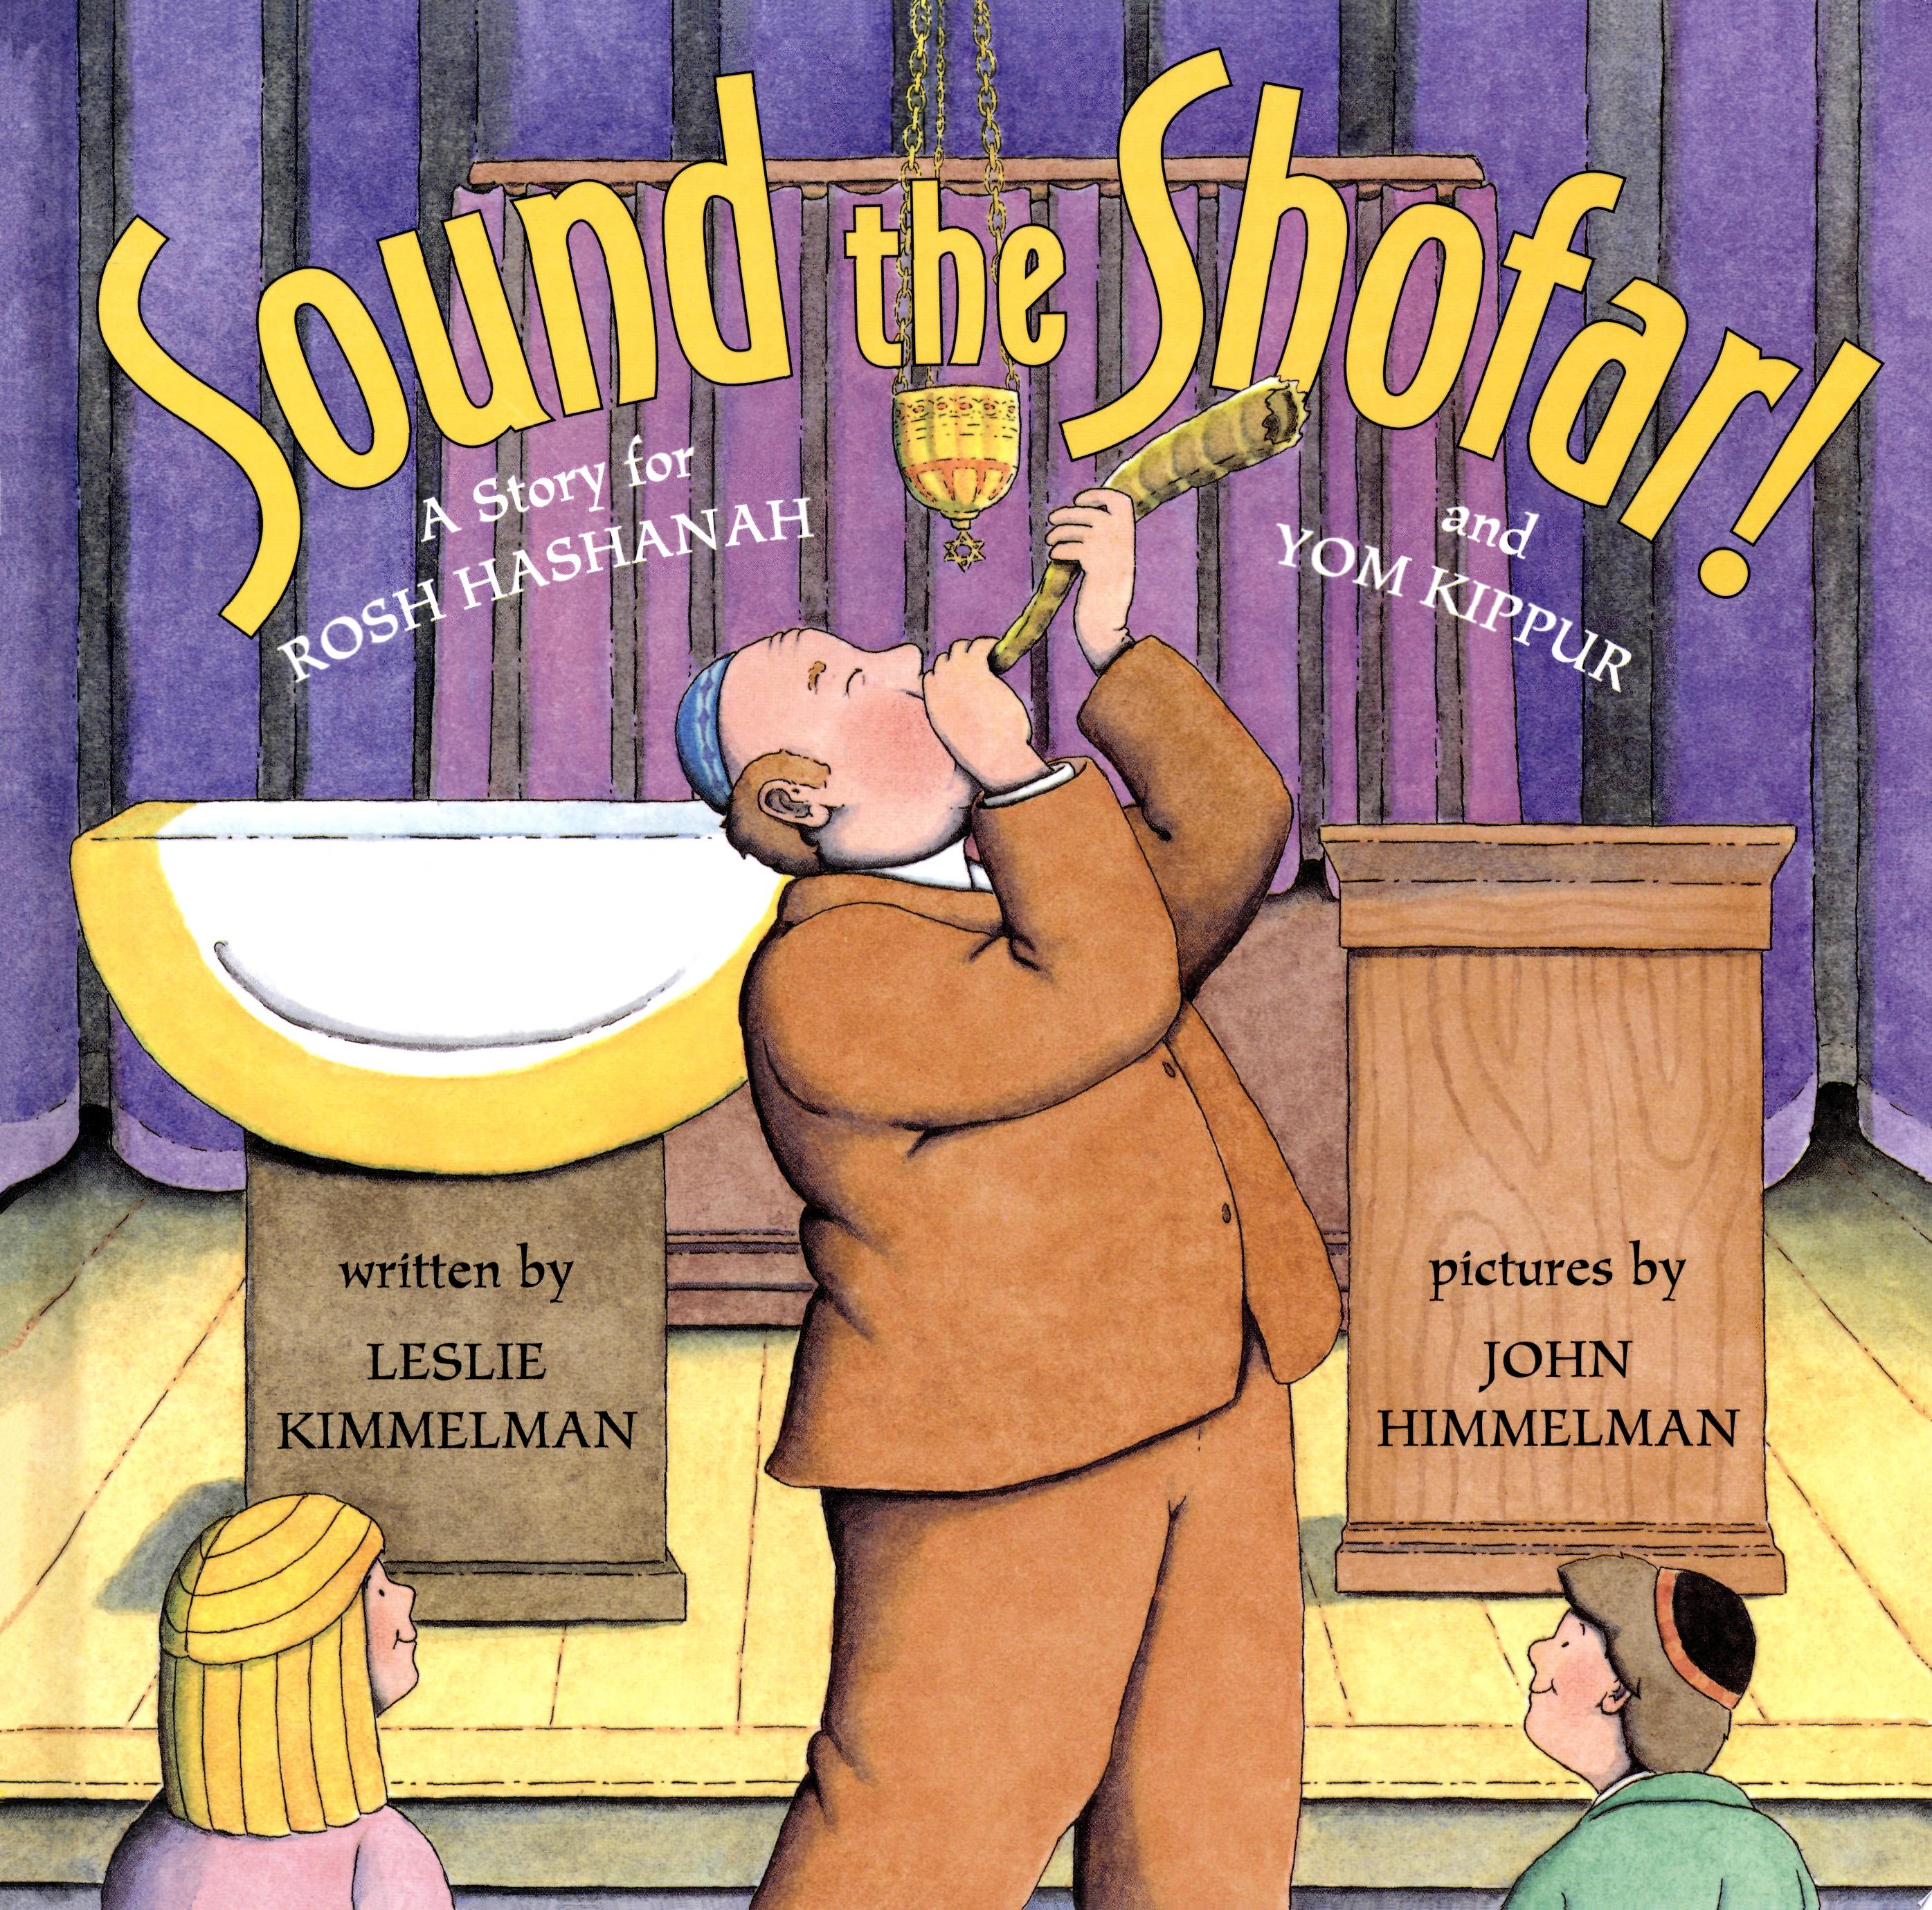 Image for "Sound the Shofar!"